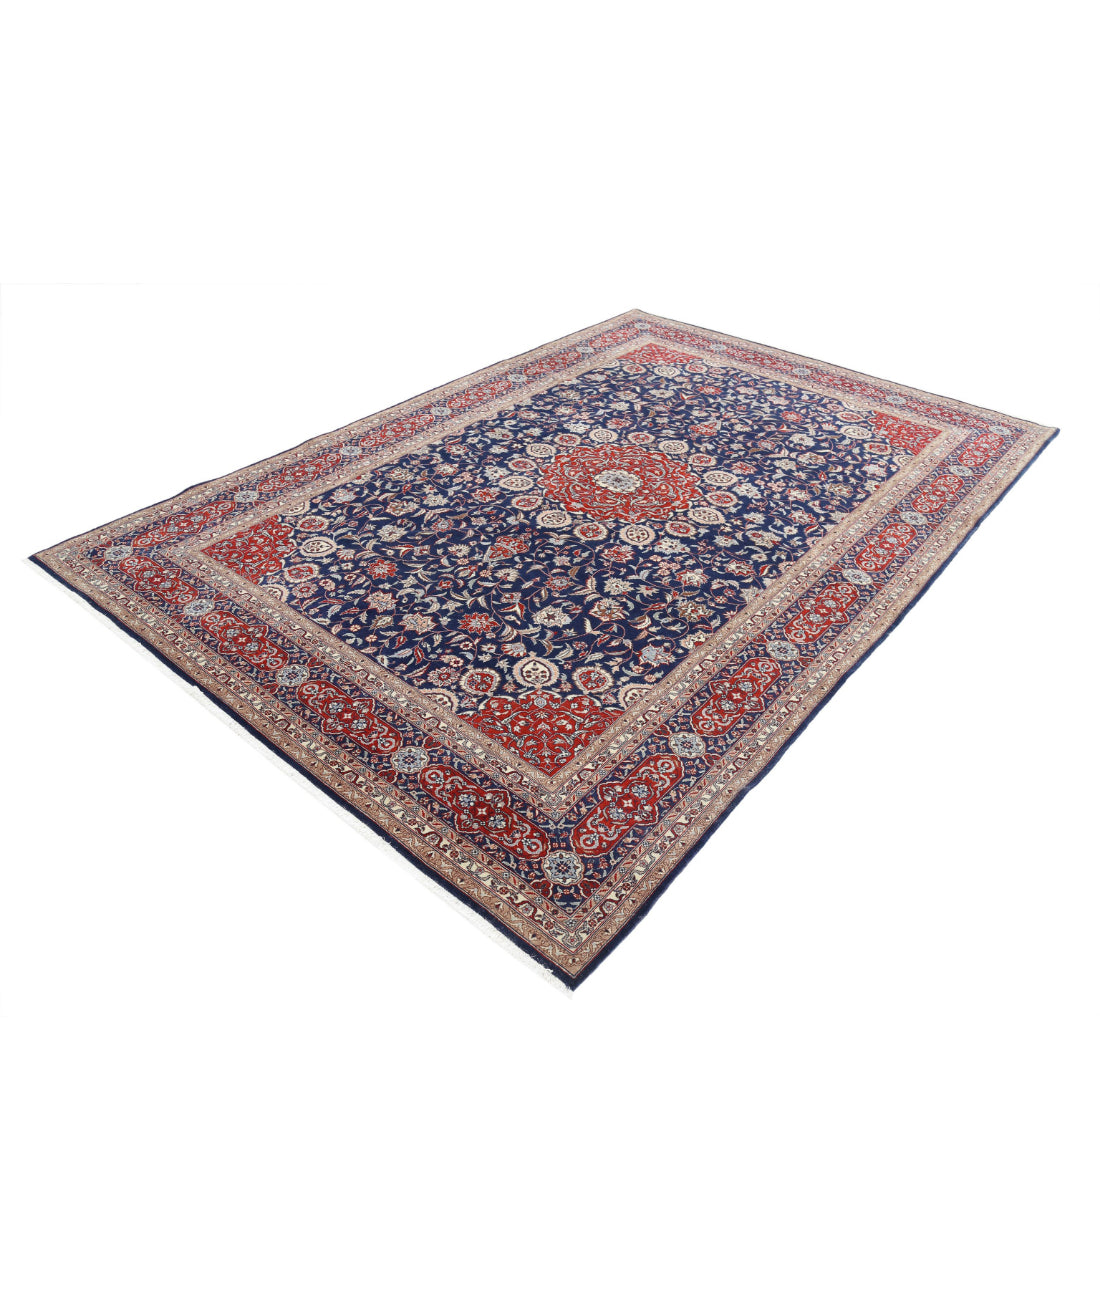 Heritage 6'8'' X 9'10'' Hand-Knotted Wool Rug 6'8'' x 9'10'' (200 X 295) / Blue / Red